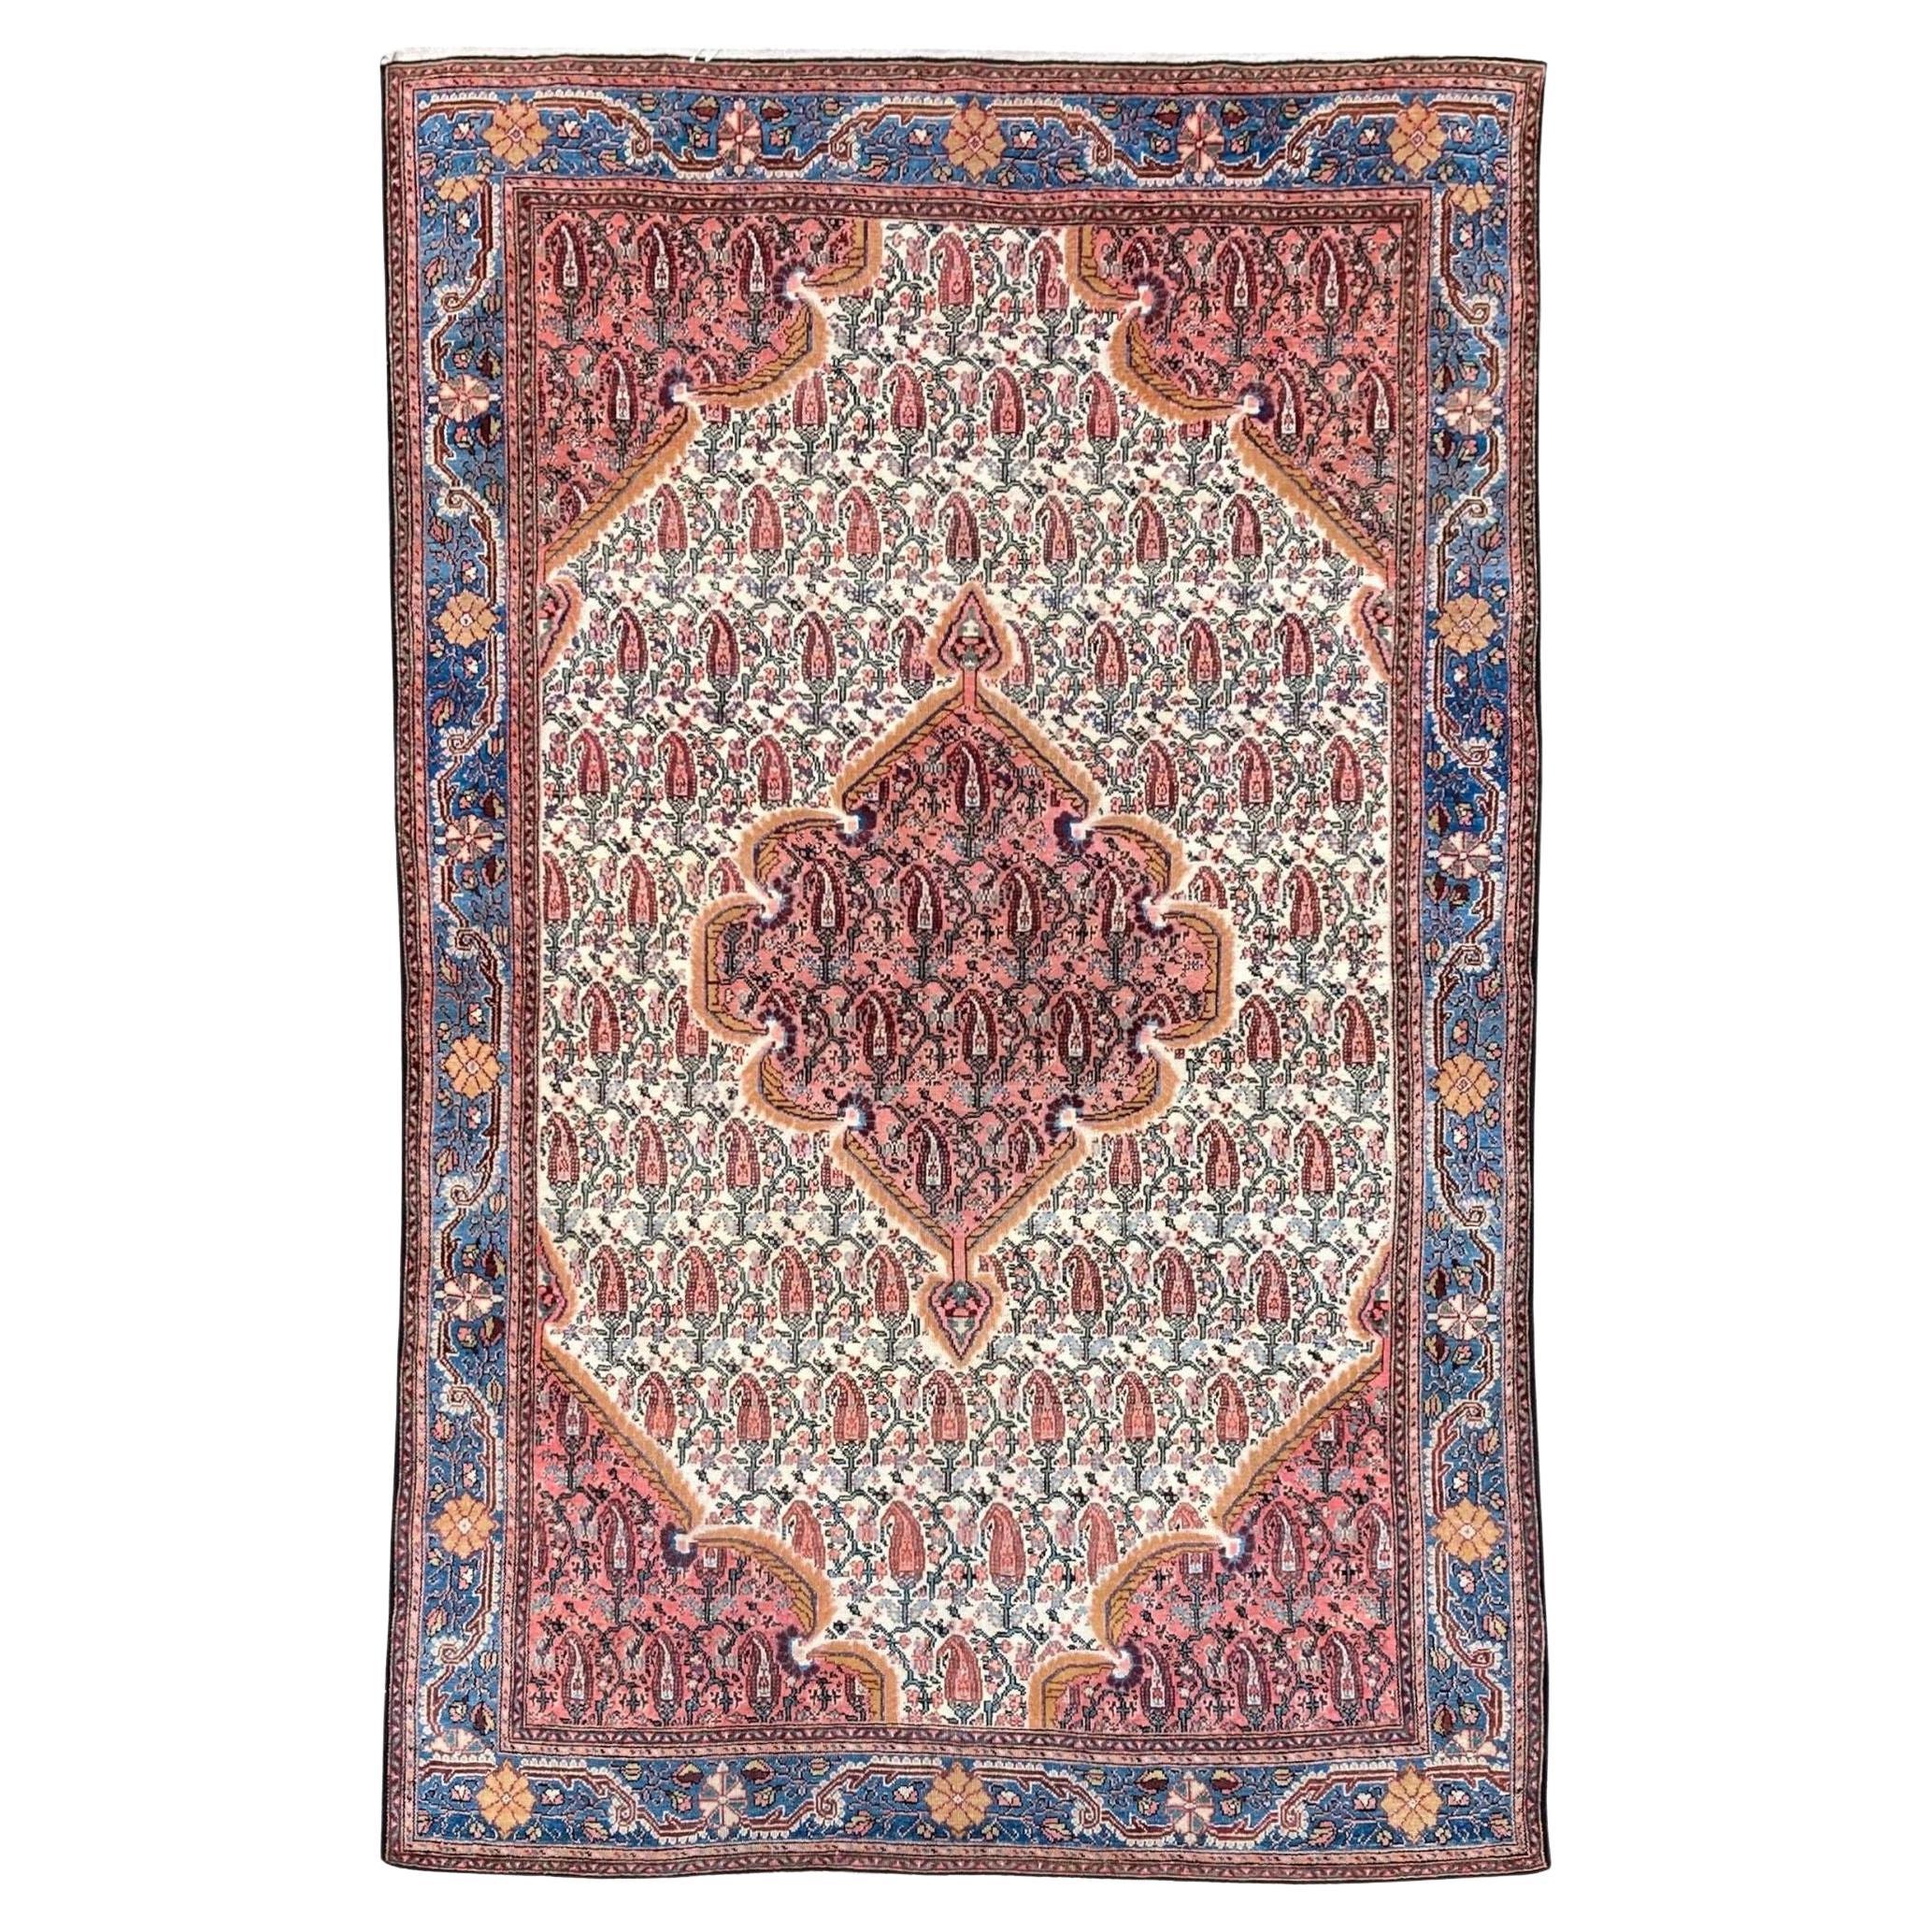 Antique Malayer Rug 1.97m X 1.32m For Sale